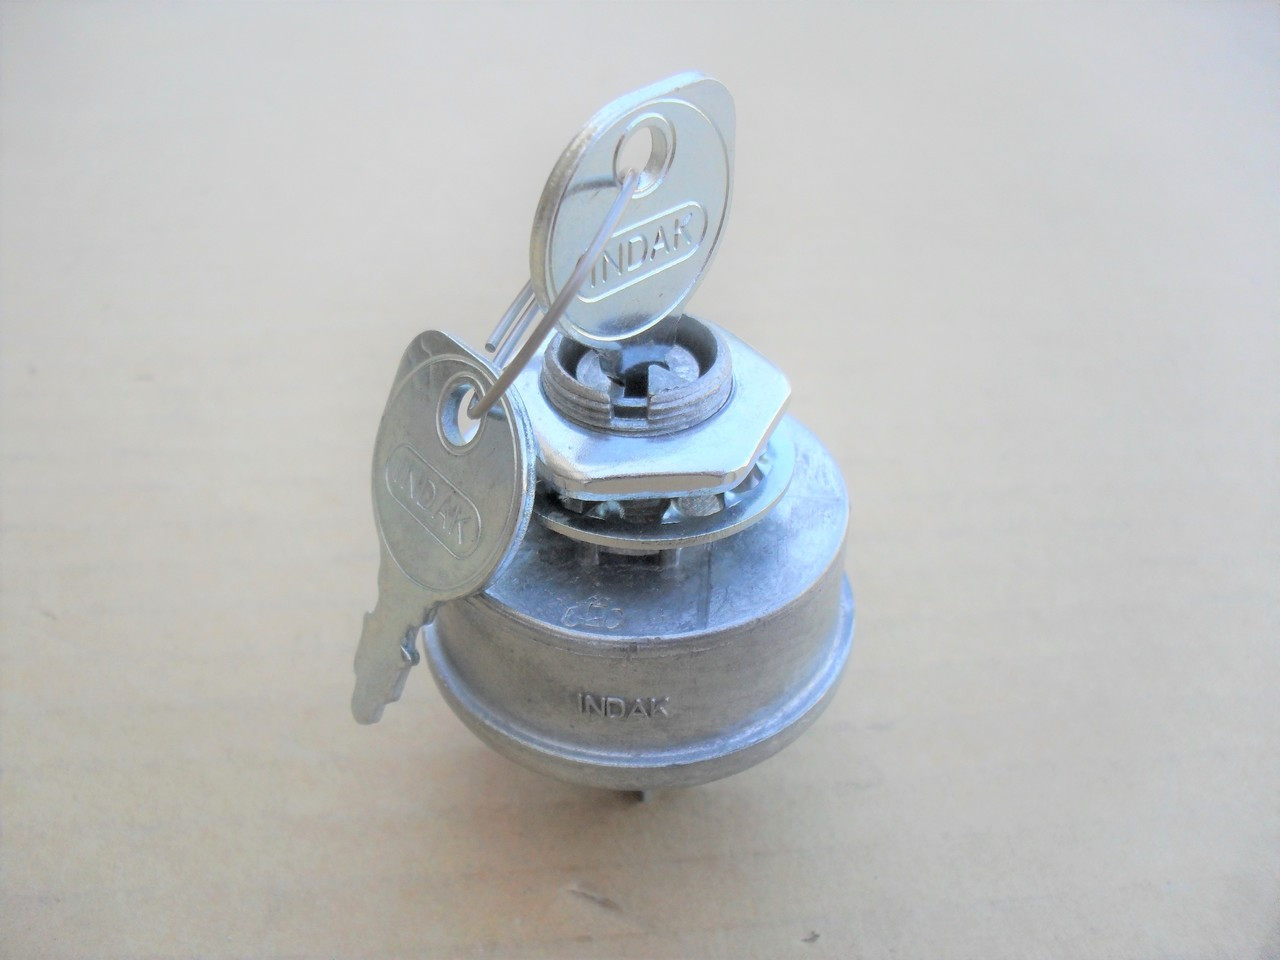 Ignition Starter Switch for Murray Scotts 091846, 091846MA, 300687, 91846, 91846MA 5 Terminals, Made In USA, Includes Keys